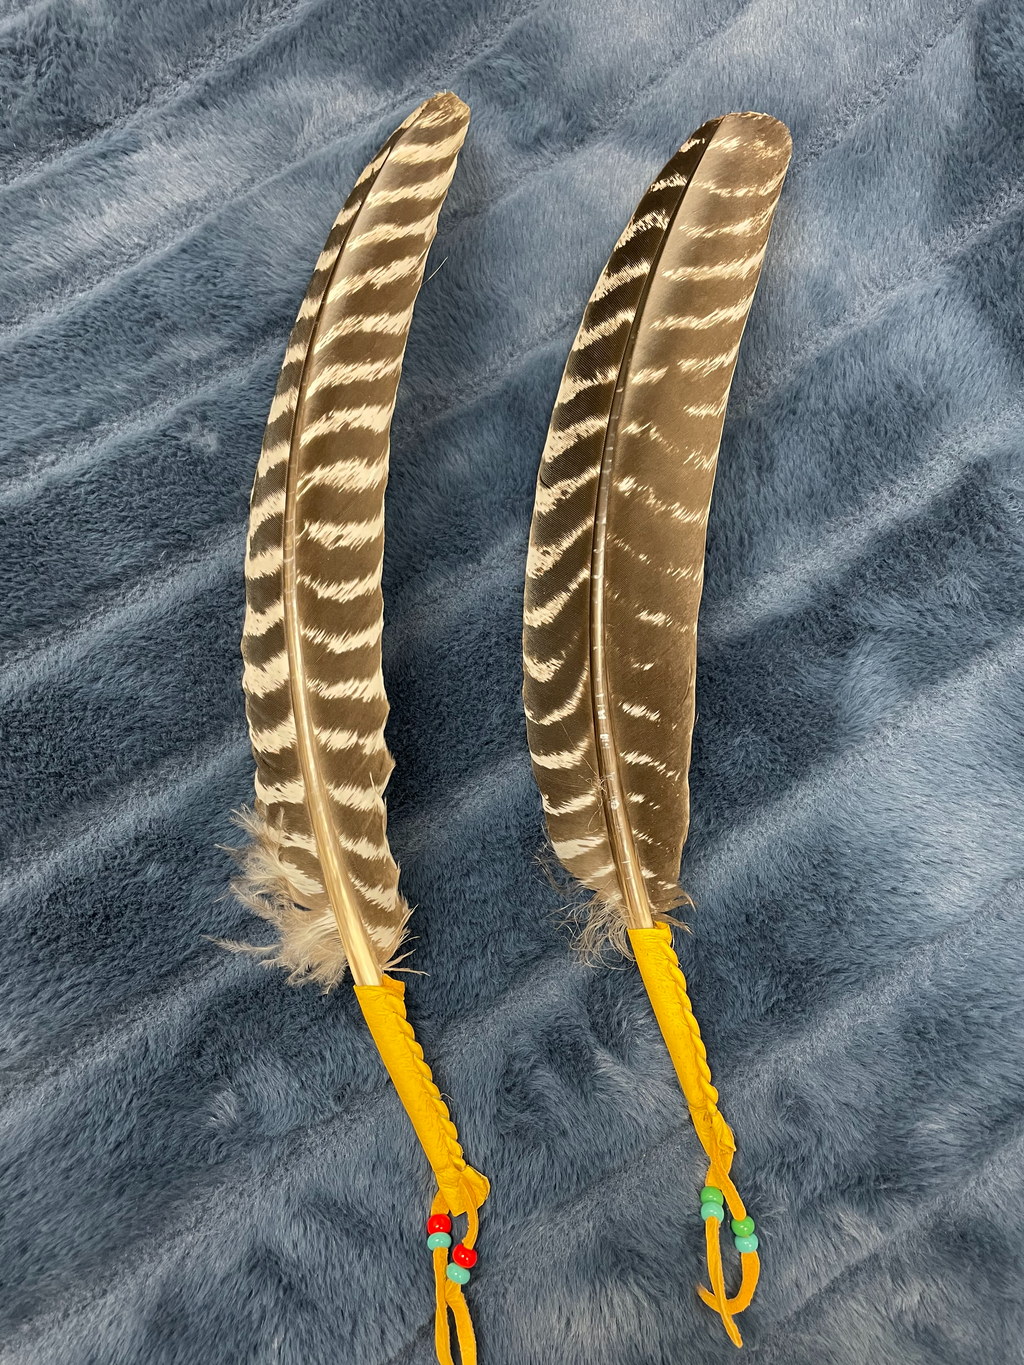 Beautiful feather for smudging, with the shaft wrapped in leather and accented with colorful beads. This is an authentic Native American made product. Use with sage or Palo Santo, etc. You can use it to: *Cleanse, clear & purify your space or environment - home, office, *Cleanse, clear or purify a person & their energy *Promote healing *Promote clarity of mind *Clear out spiritual impurities *Enhance ceremony or ritual. Approximately 13" (or 14" with leather, beaded dangles). Cost is $21.50.